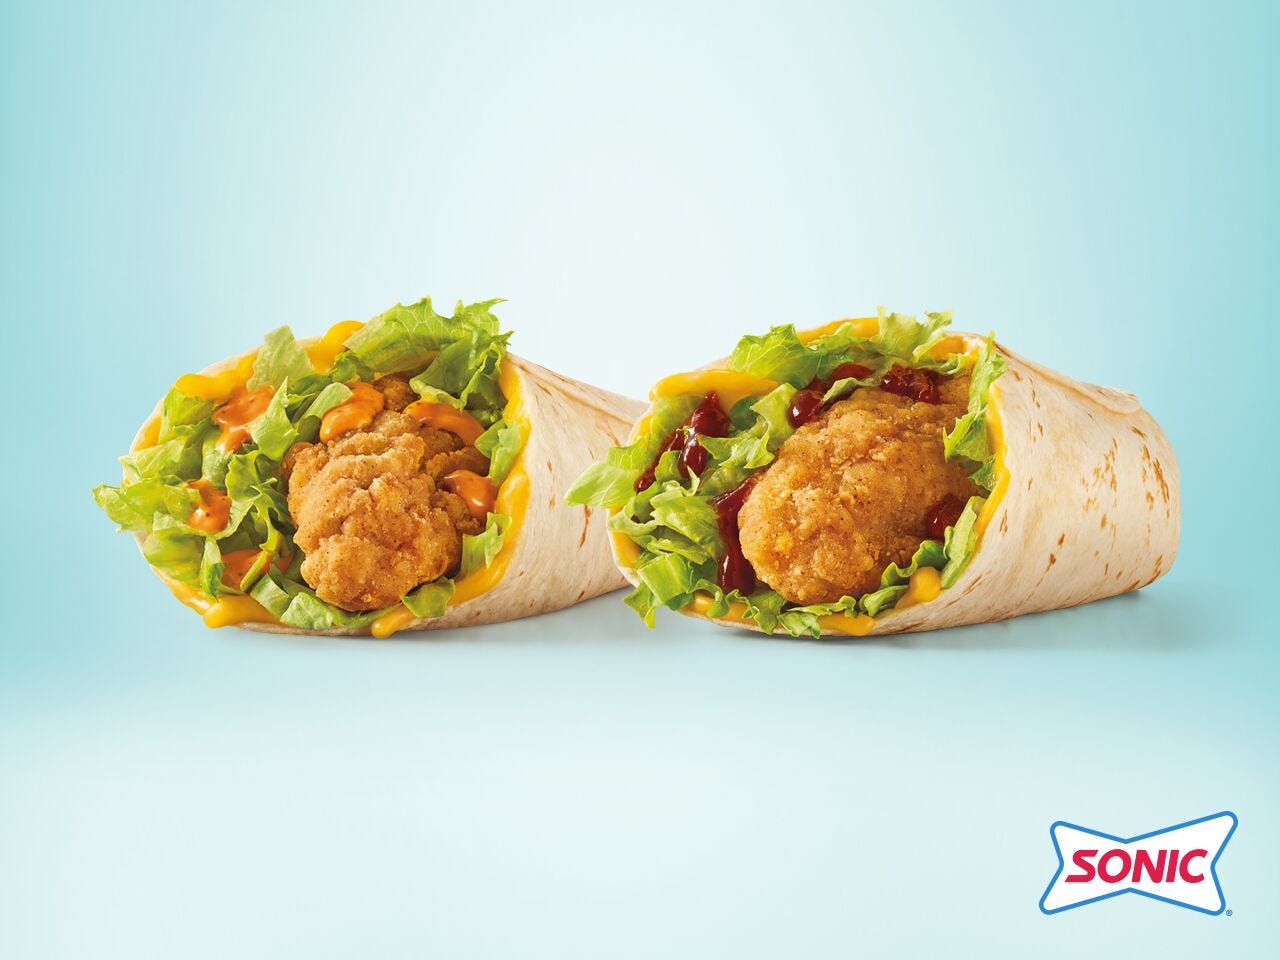 under wraps: two crispy chicken tender wraps now available at sonic for a limited time